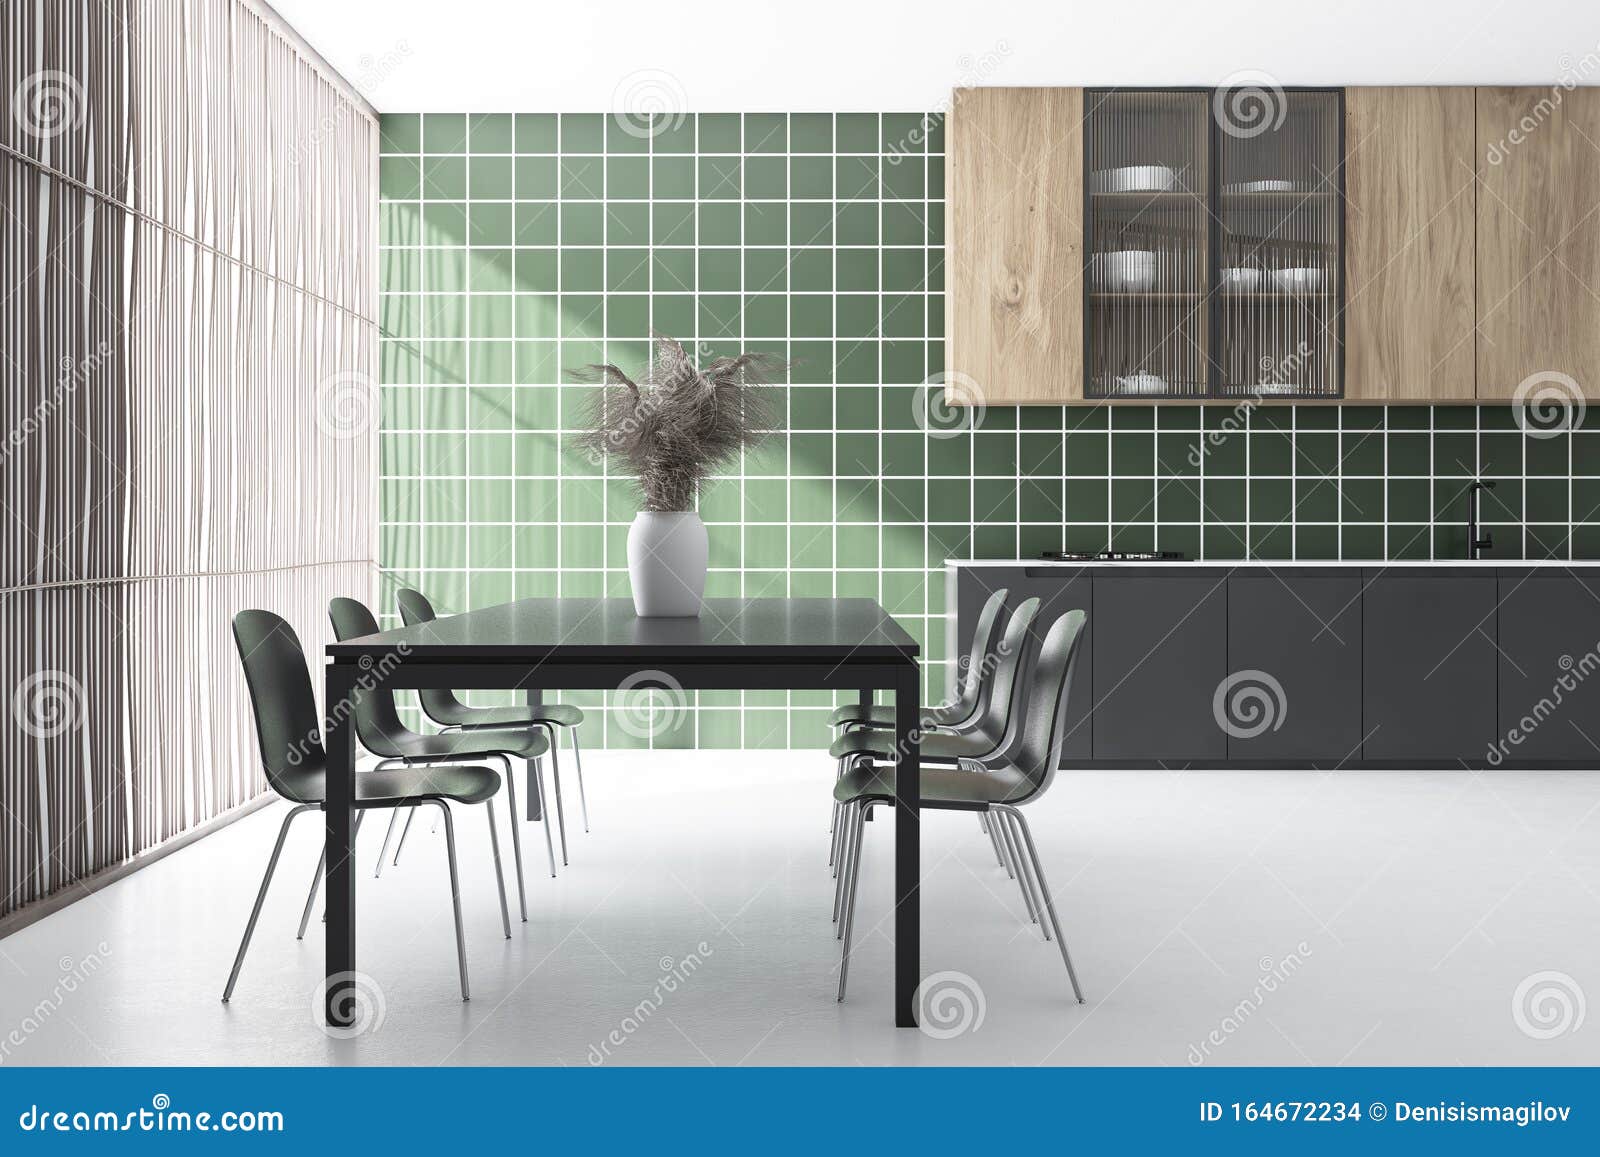 Green Tile Kitchen Interior With Dining Table Stock Illustration Illustration Of Dwelling